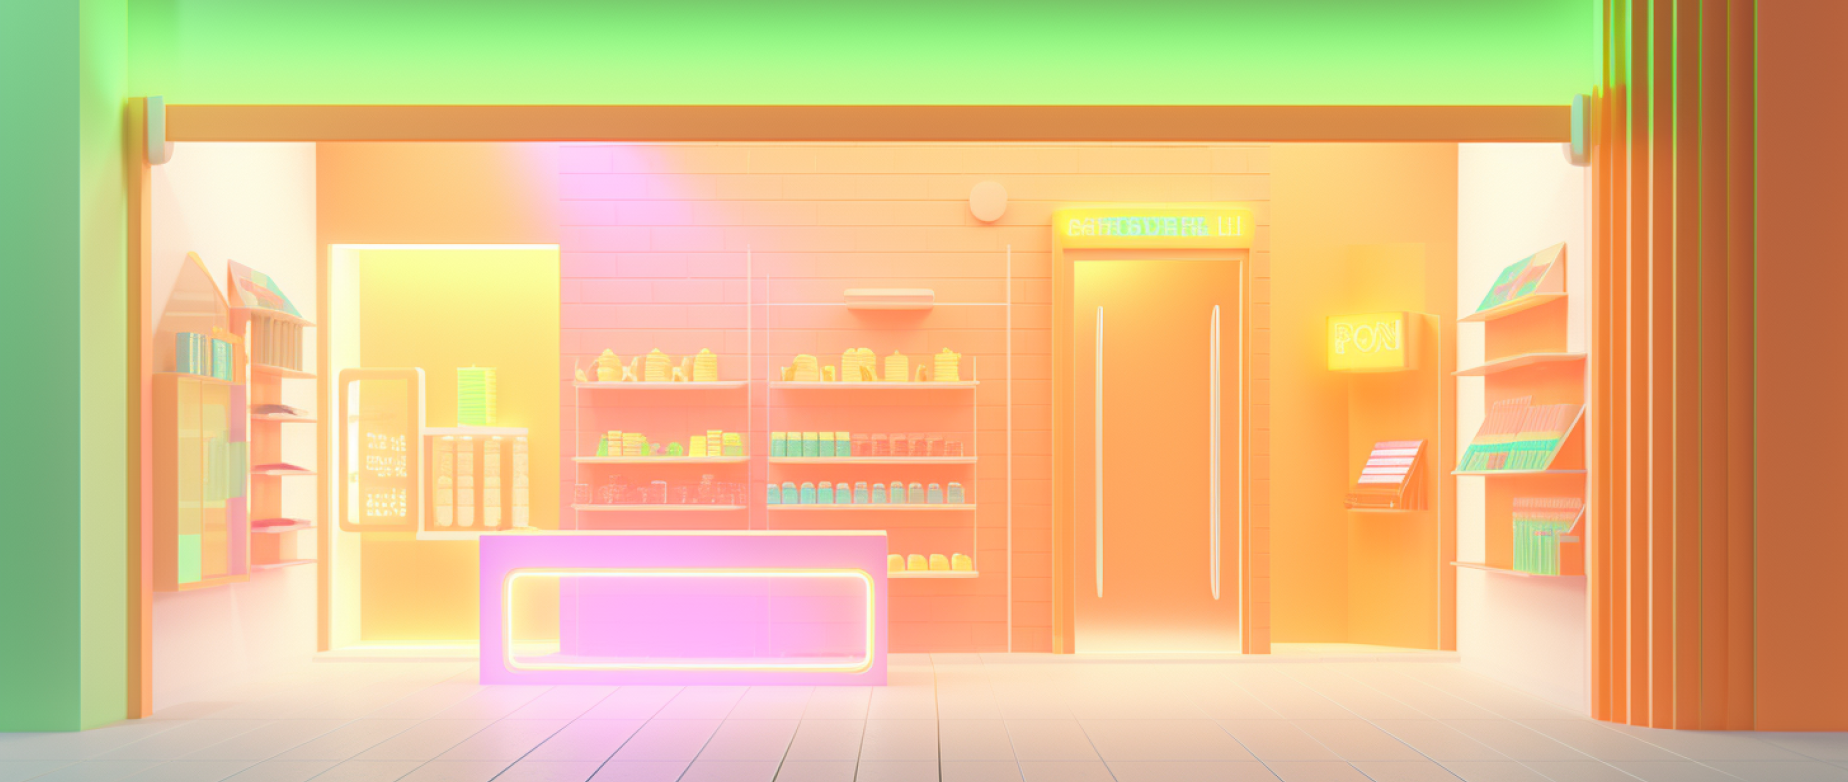 A neon lit store front with multiple colors.